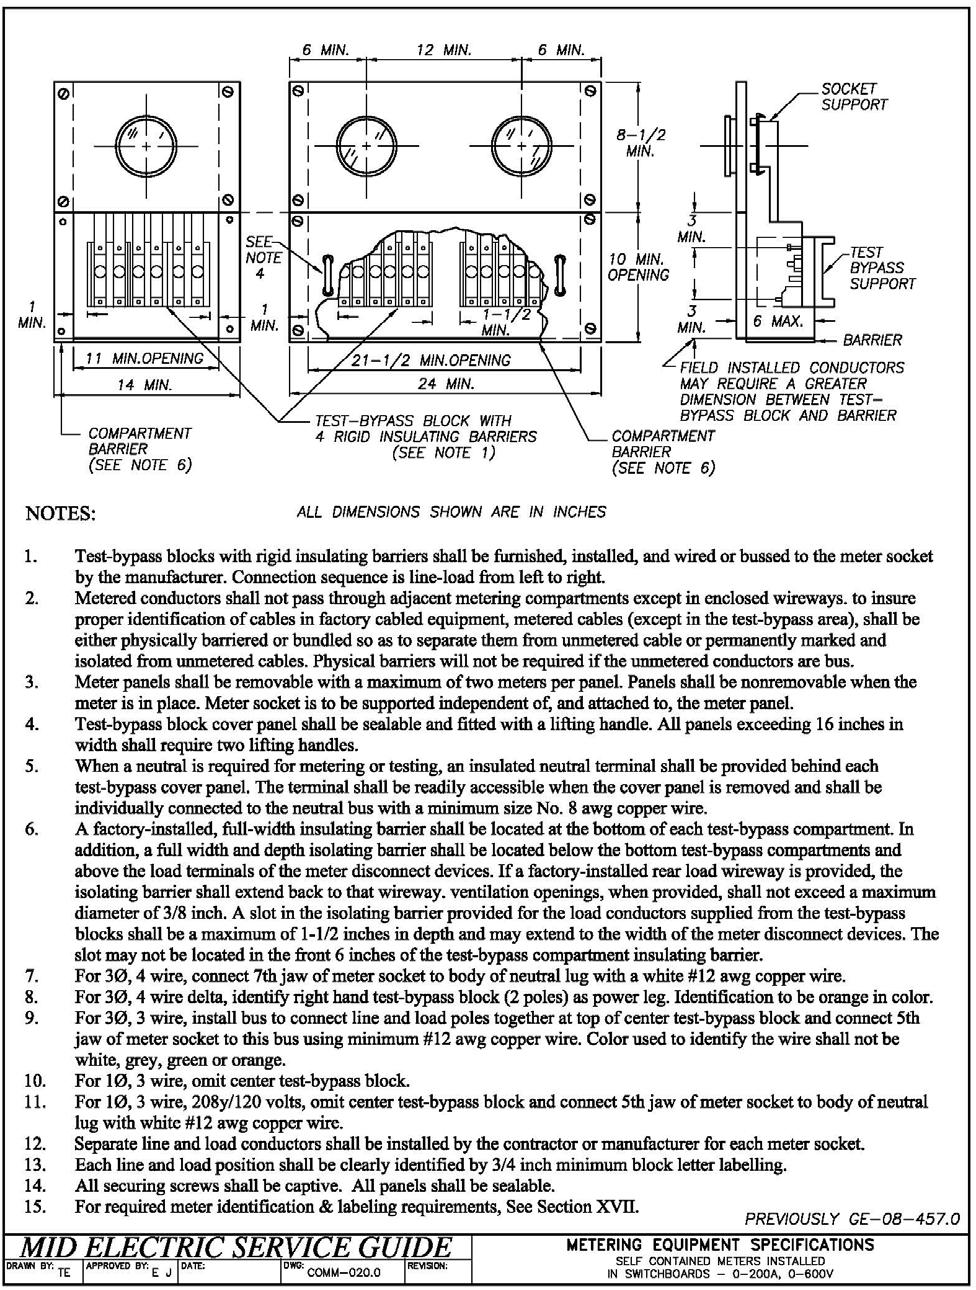 Electric Service Guide Commercial & Industrial Drawing COMM-020.